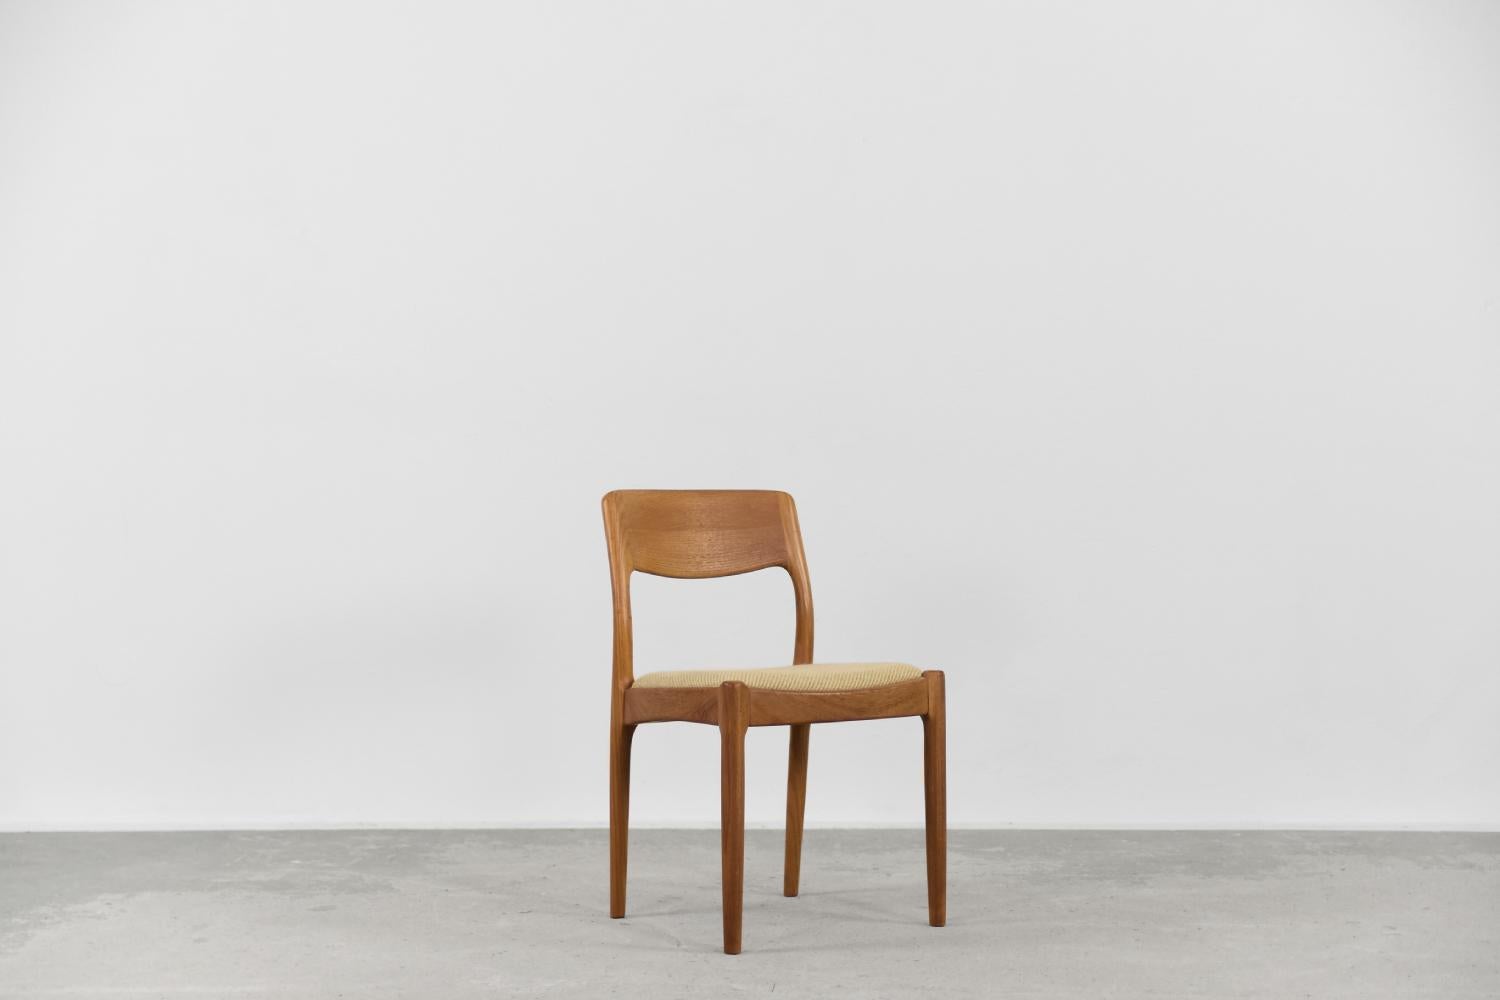 This modernist dining chair was designed by Juul Kristensen for the Danish manufacture JK Denmark during the 1960s. The chair is made of solid teak wood in a warm shade of brown and strong graining. The contoured backrest smoothly blends with the